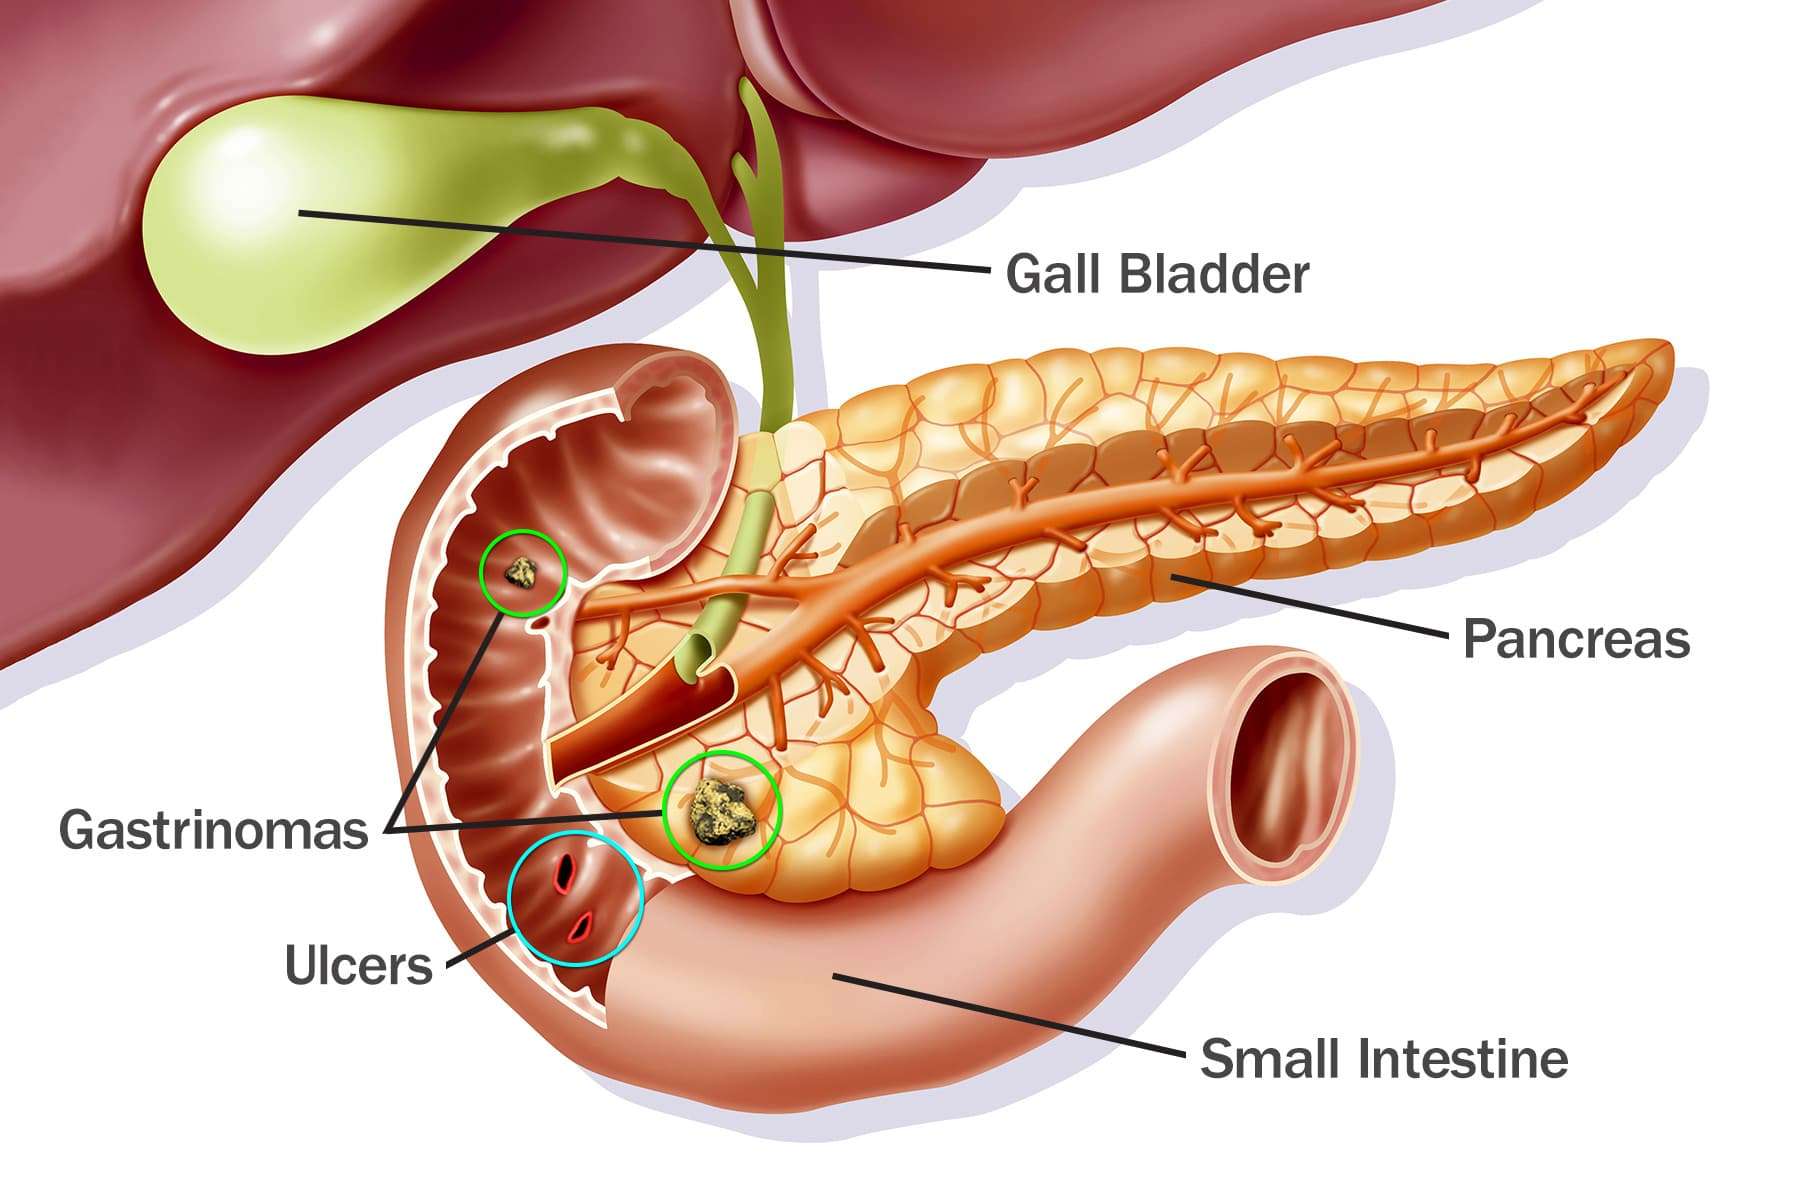 Visual Guide to Stomach Ulcers